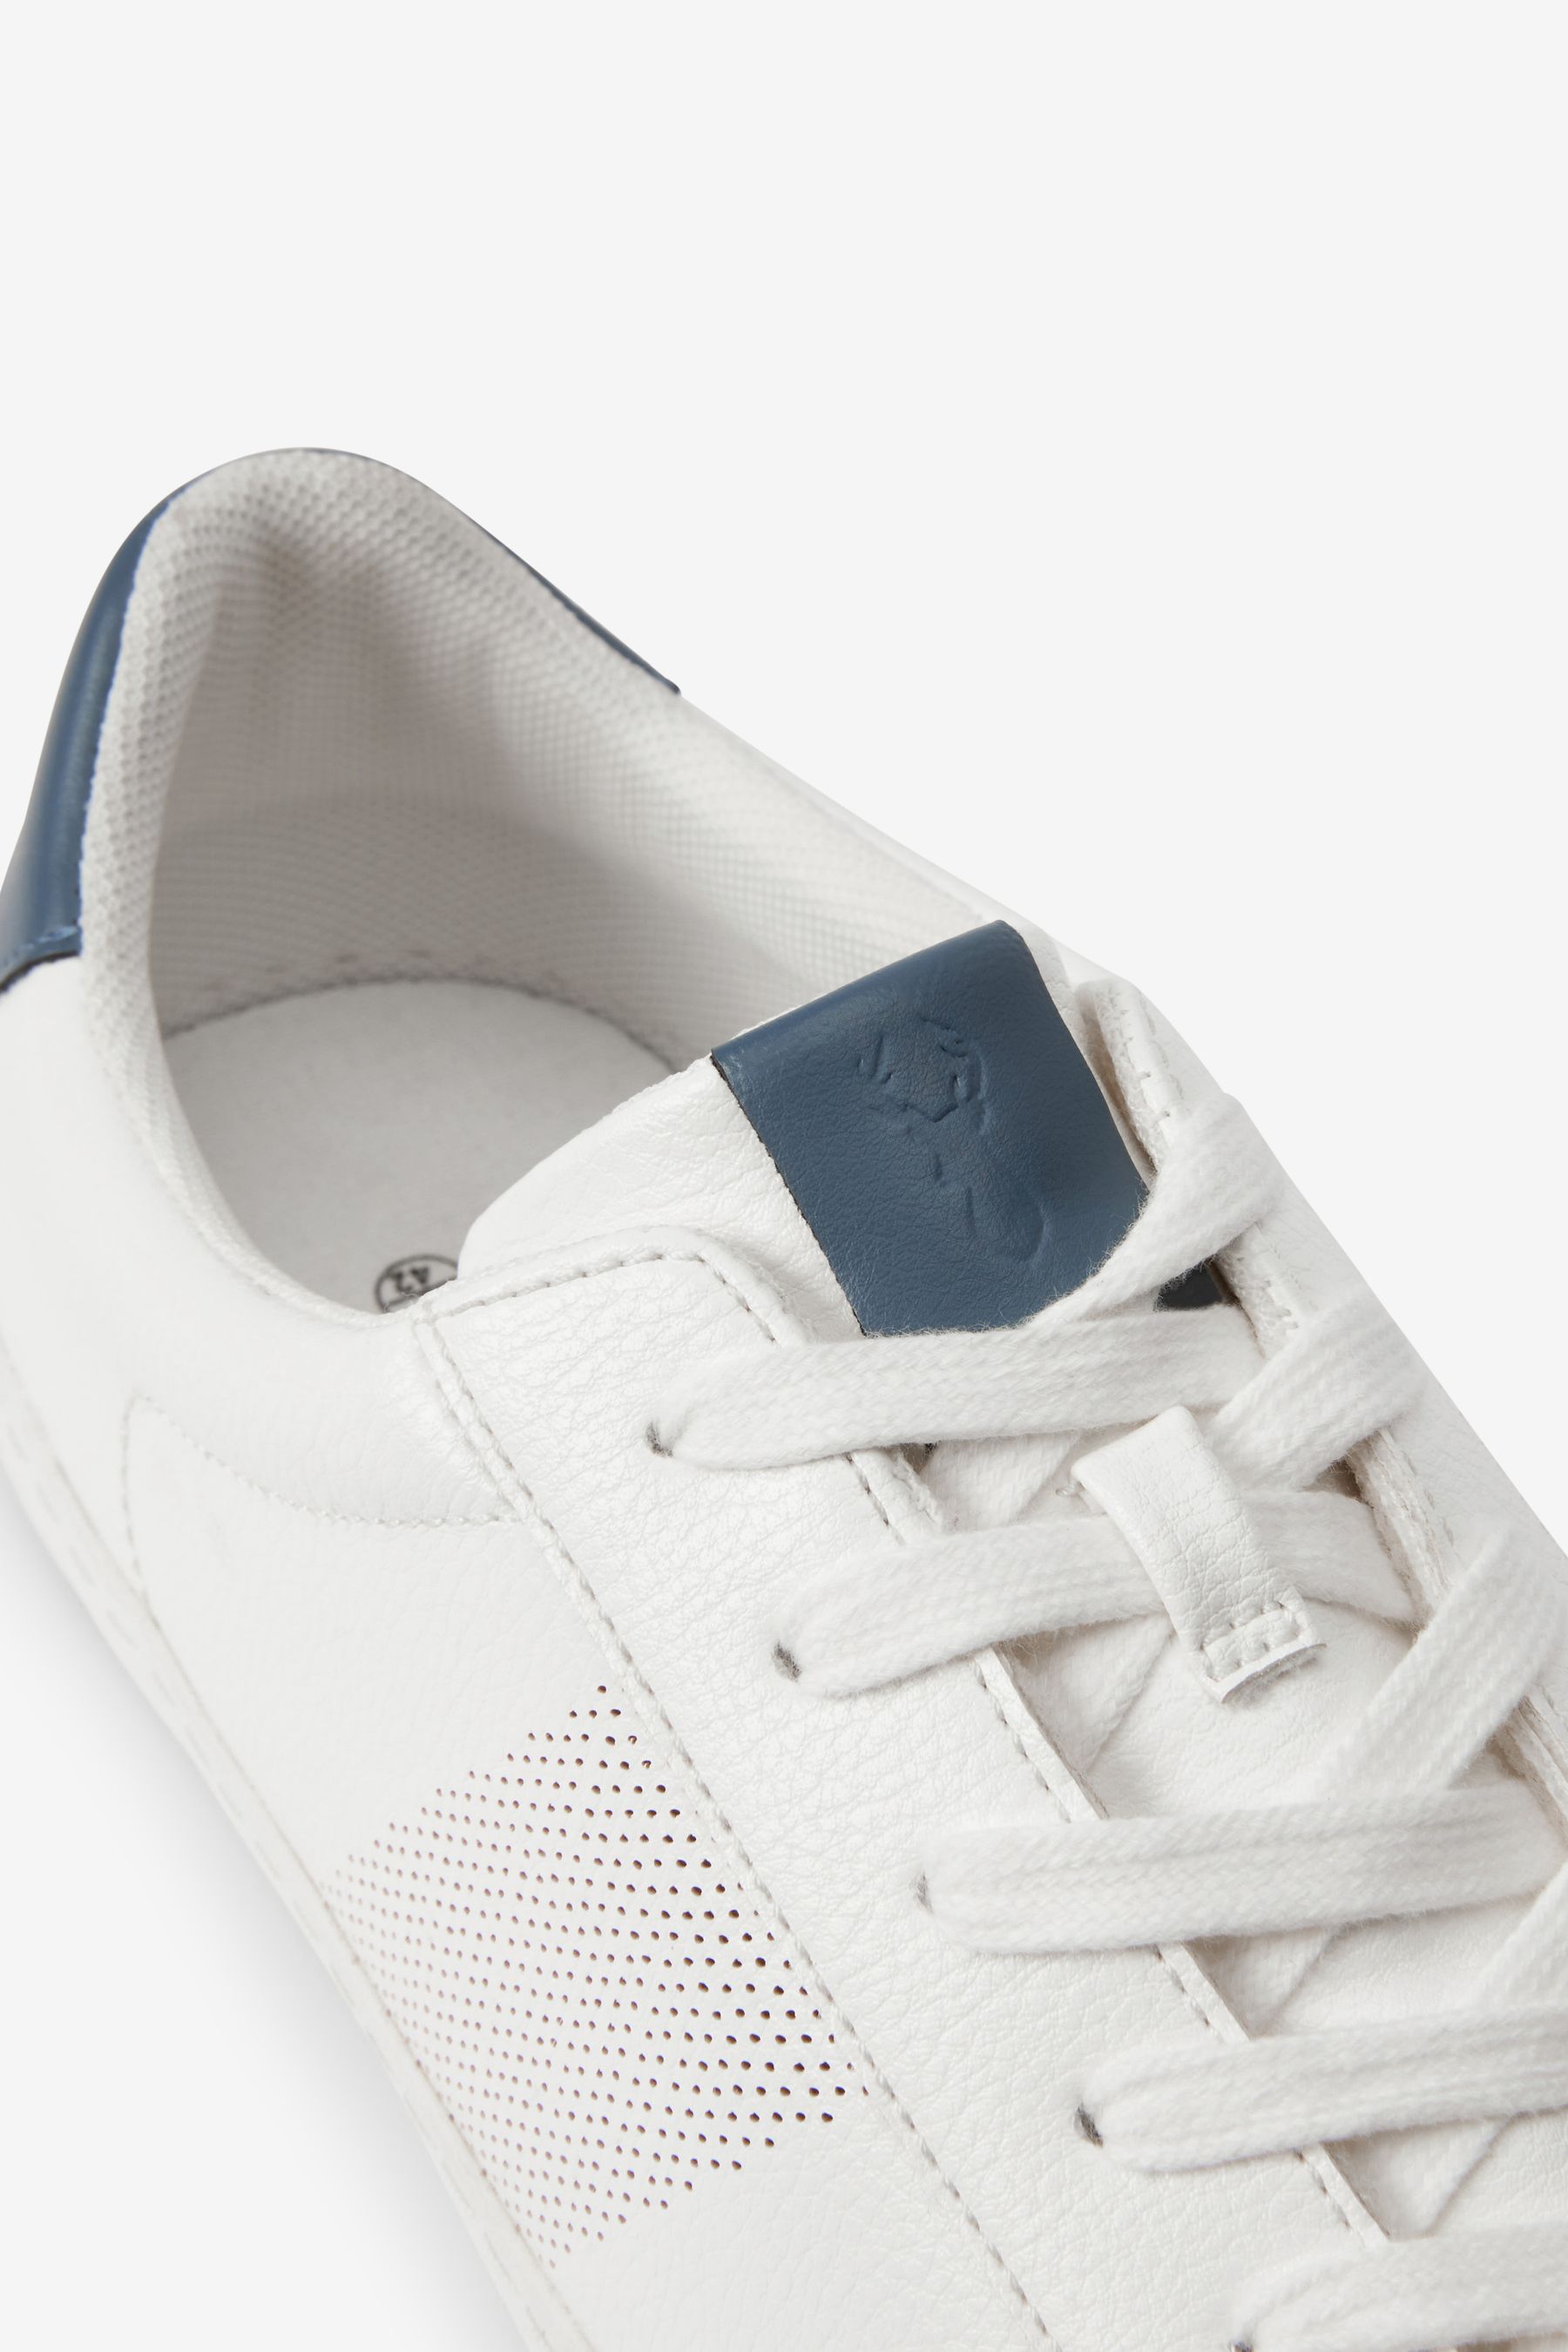 Perforated Side Trainers